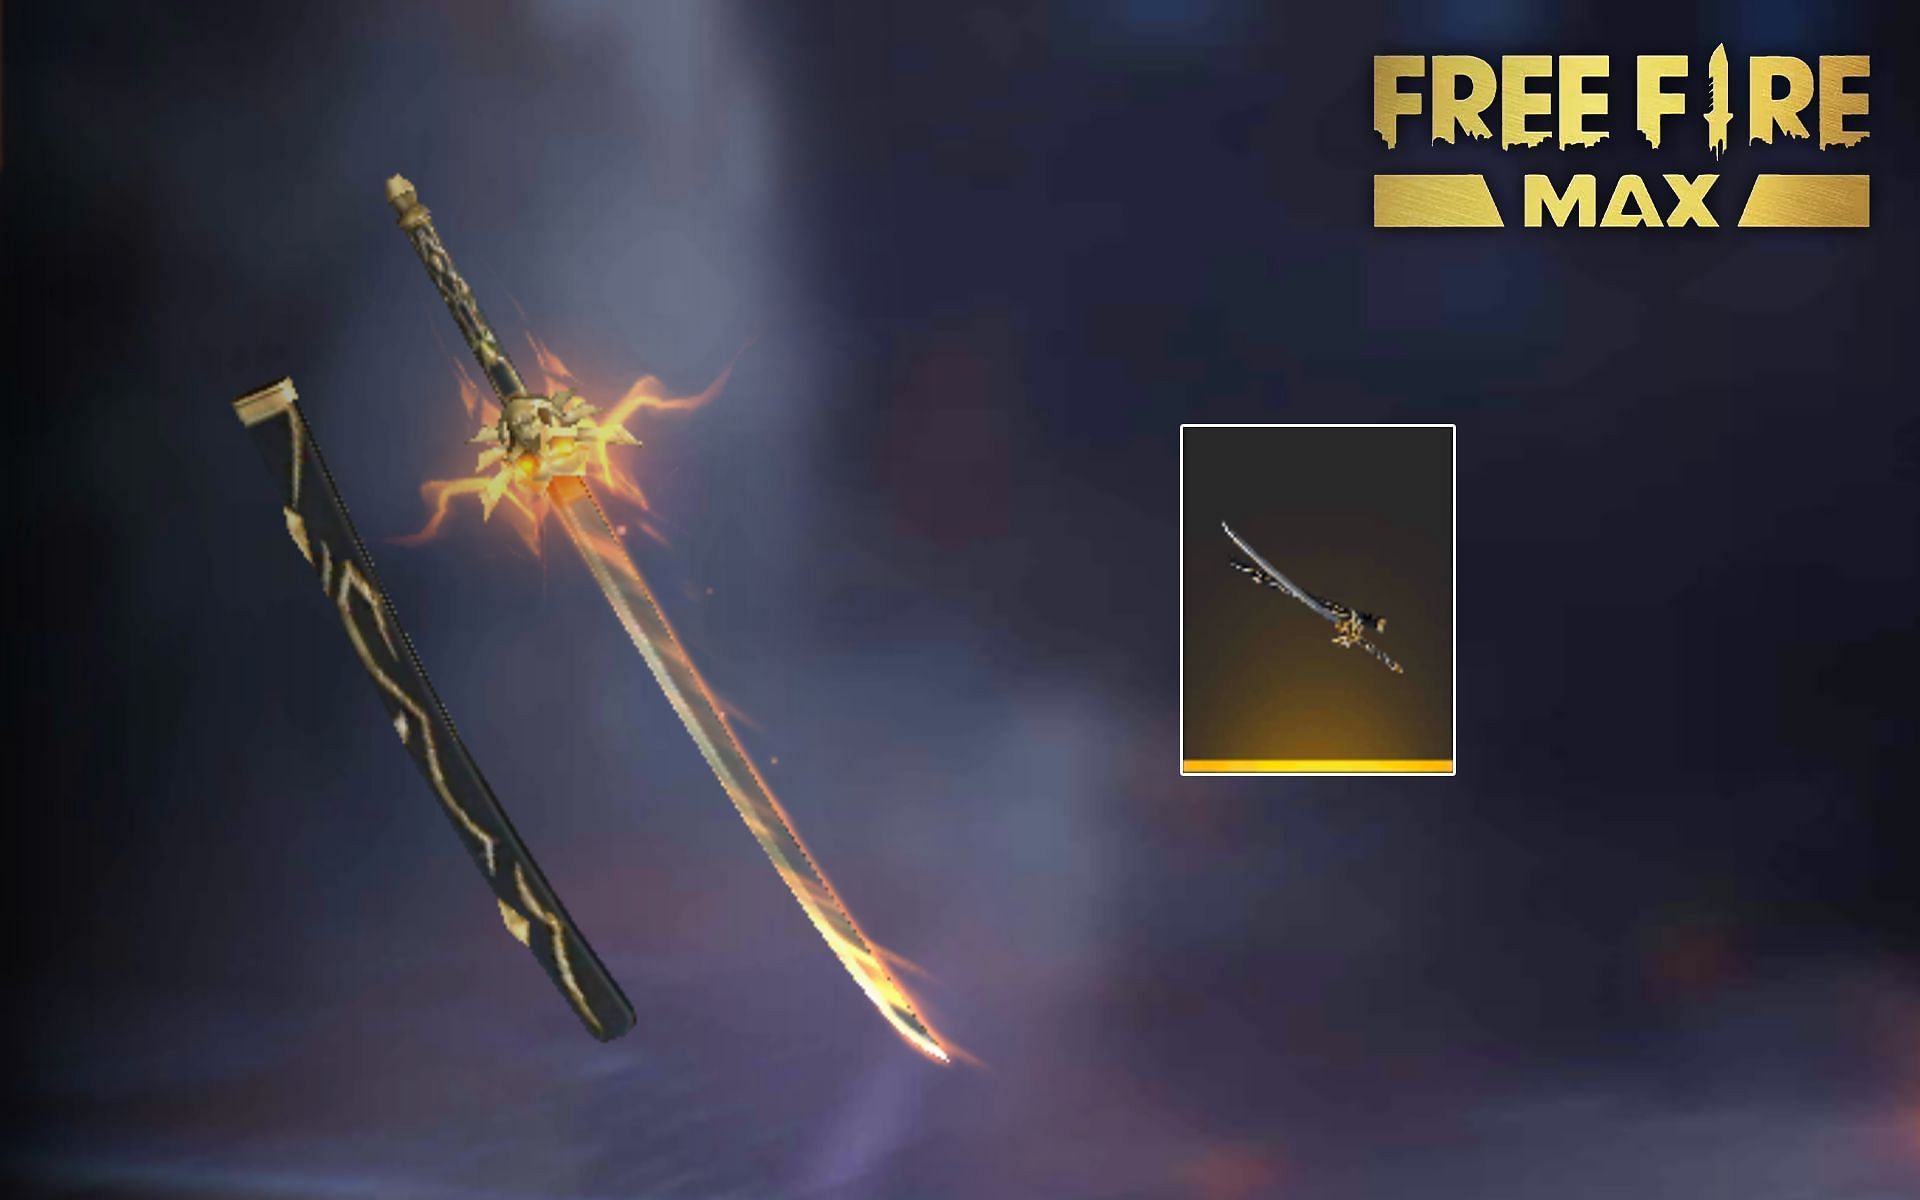 This skin is available for free in the new event (Image via Sportskeeda)